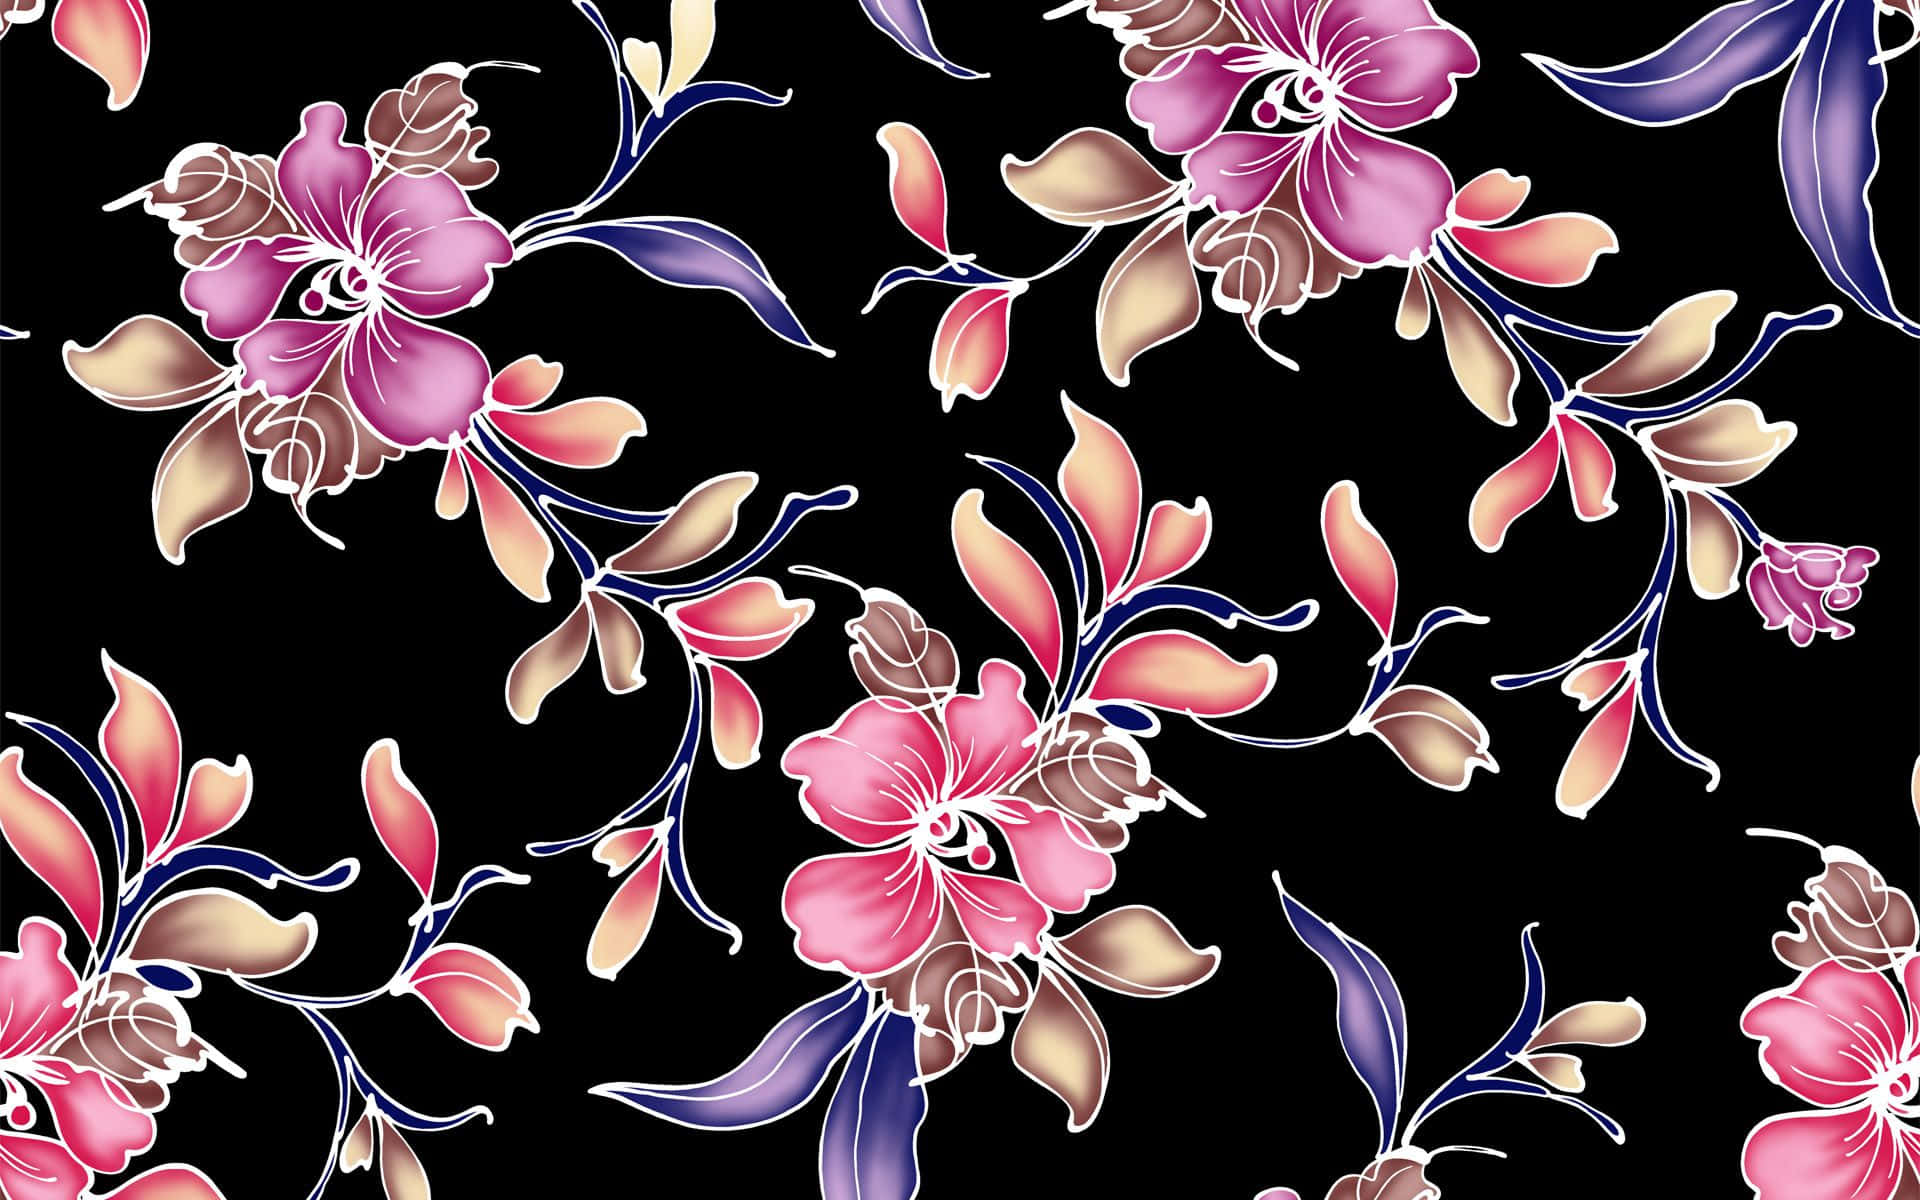 Bold colors make for a beautiful floral pattern wallcovering